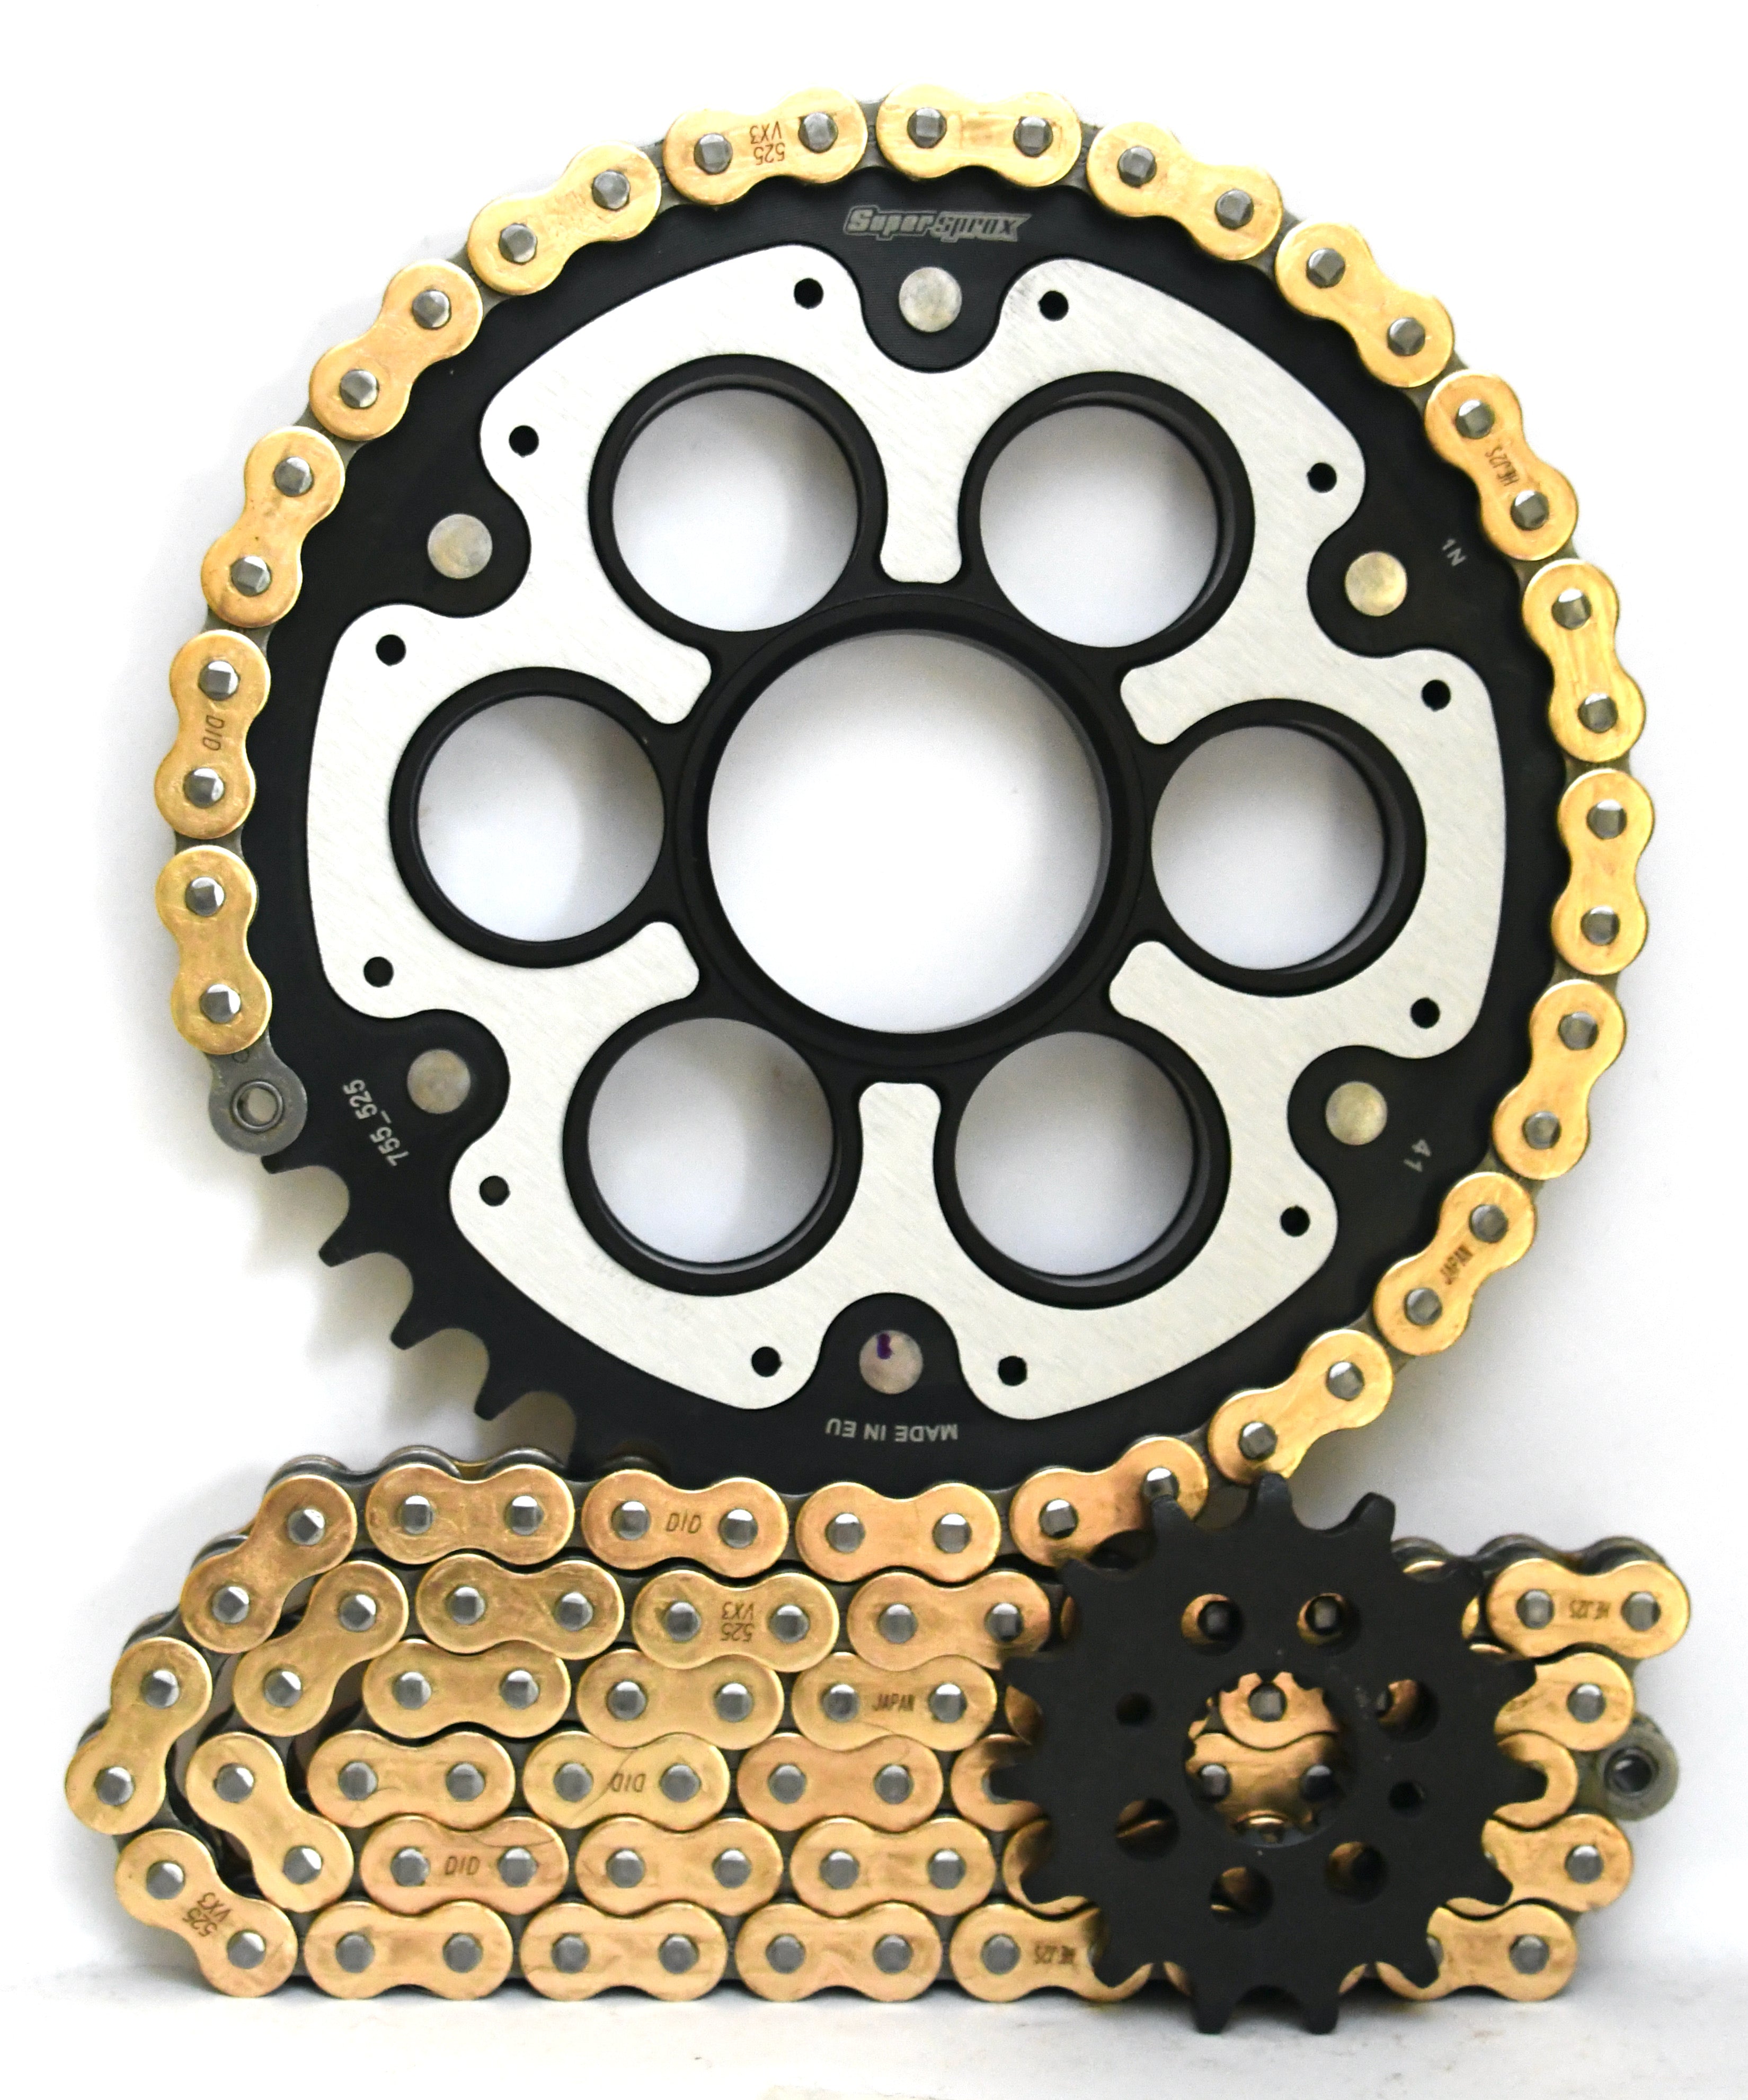 Supersprox Chain & Sprocket Kit for Ducati Diavel 1260 2018> - Standard Gearing